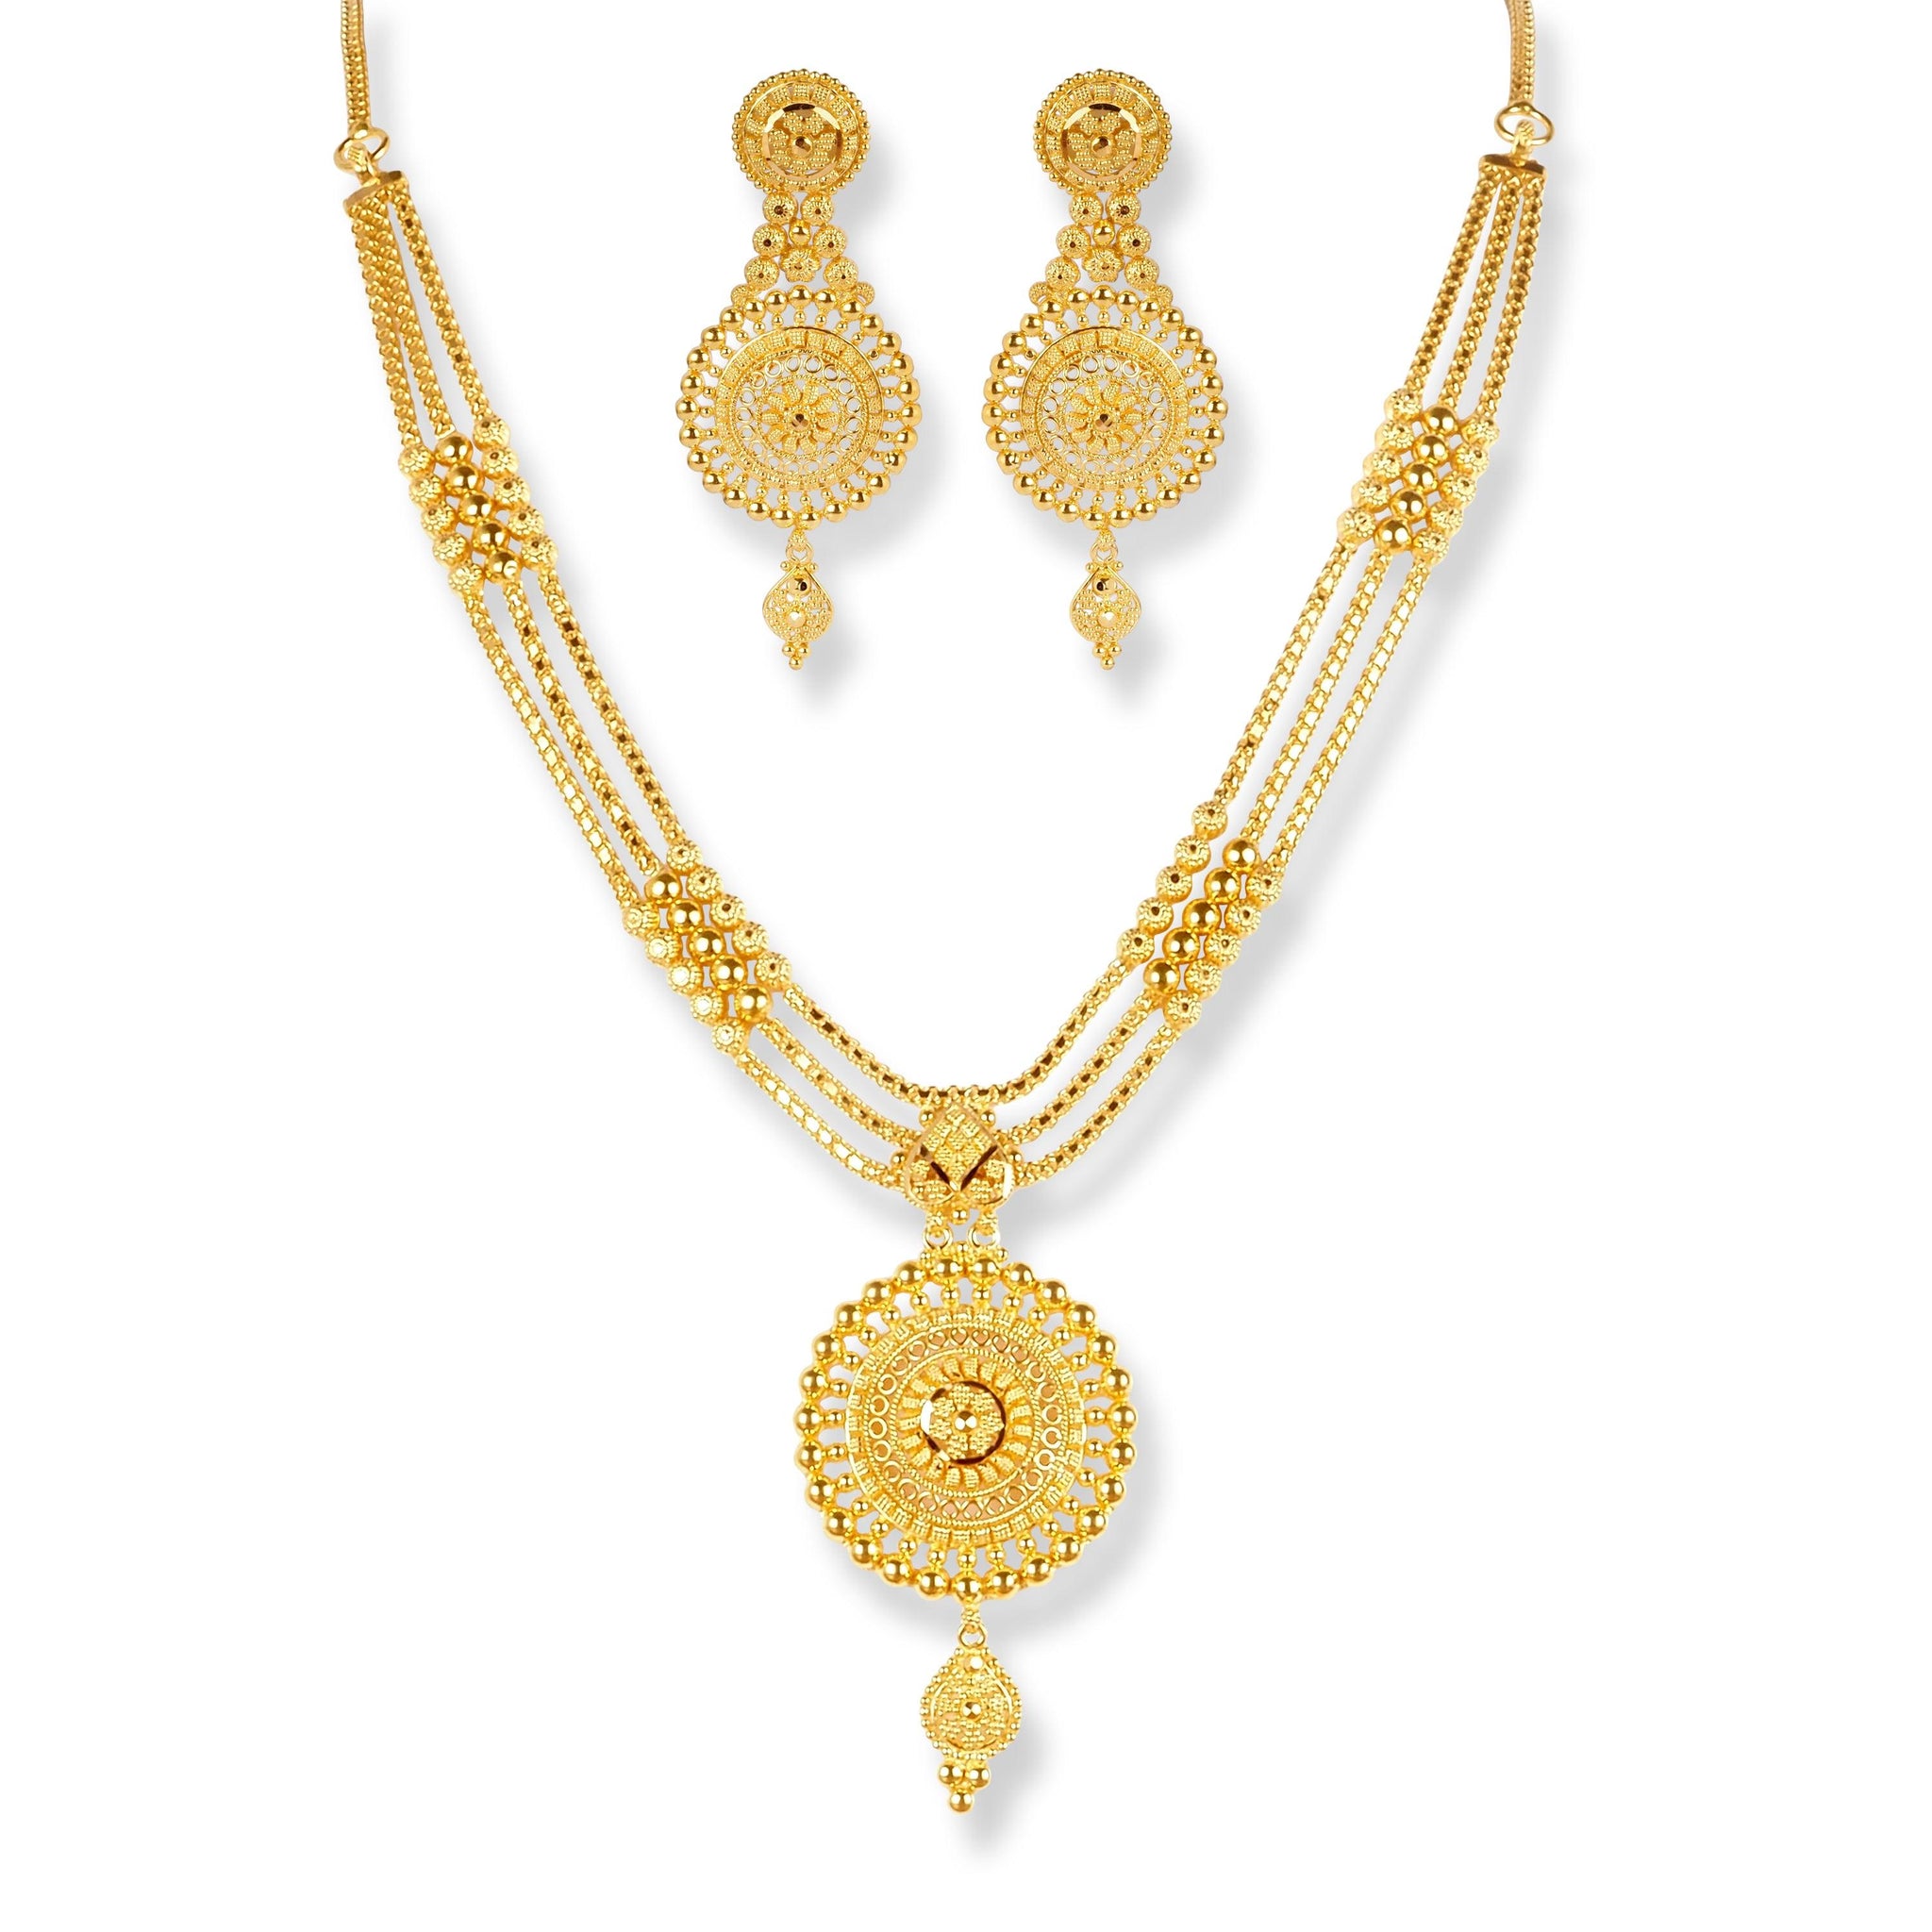 22ct Gold Three Row Necklace Set With Beaded Design - N7927